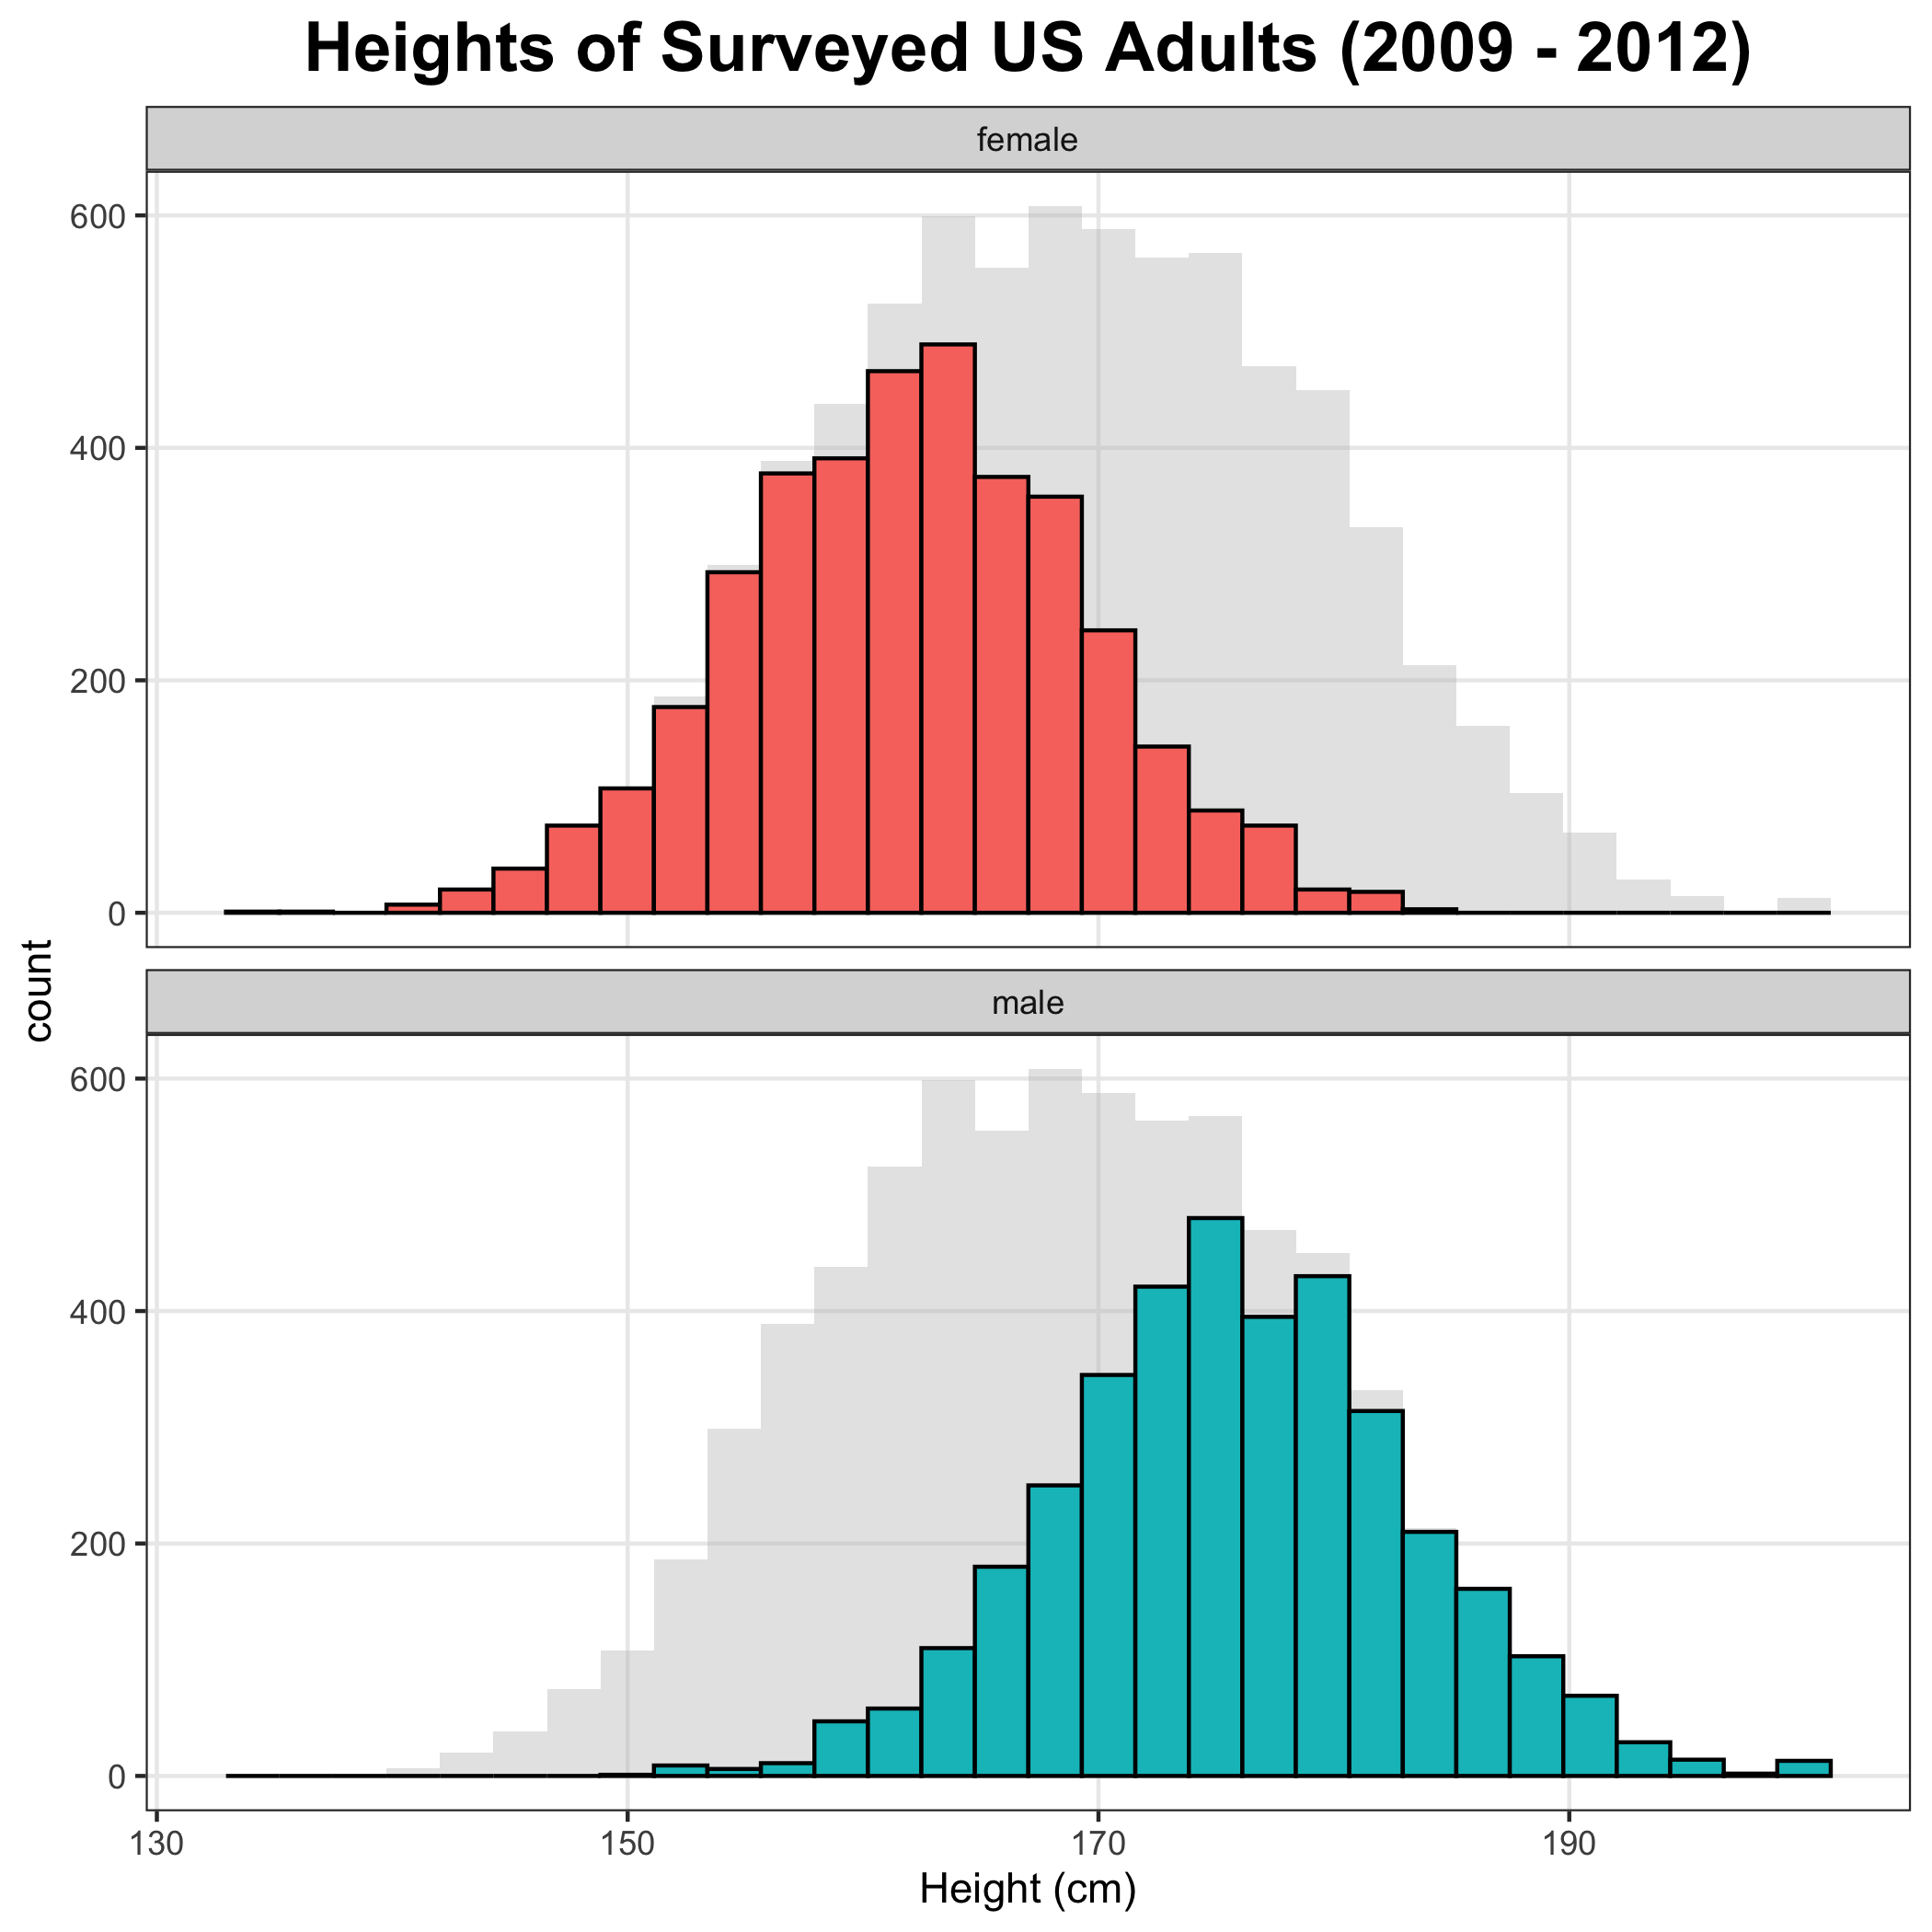 Histograms of the heights of men and women surveyed by the NHANES program between 2009 and 2012